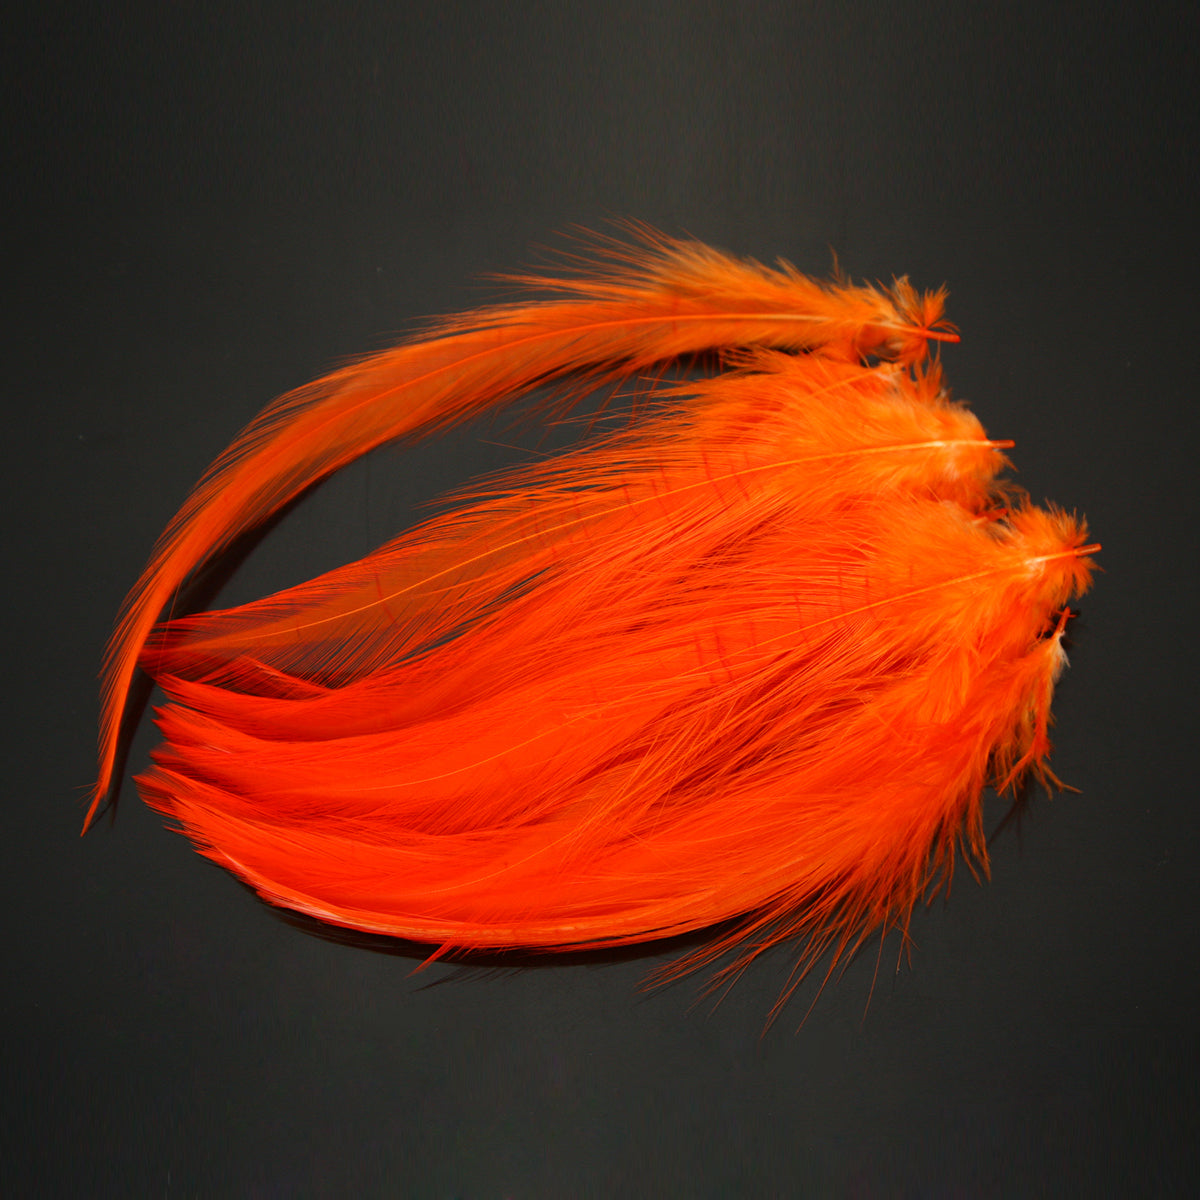 Saltwater Neck Hackle Feathers Fly Tying Material – LeLe Flies